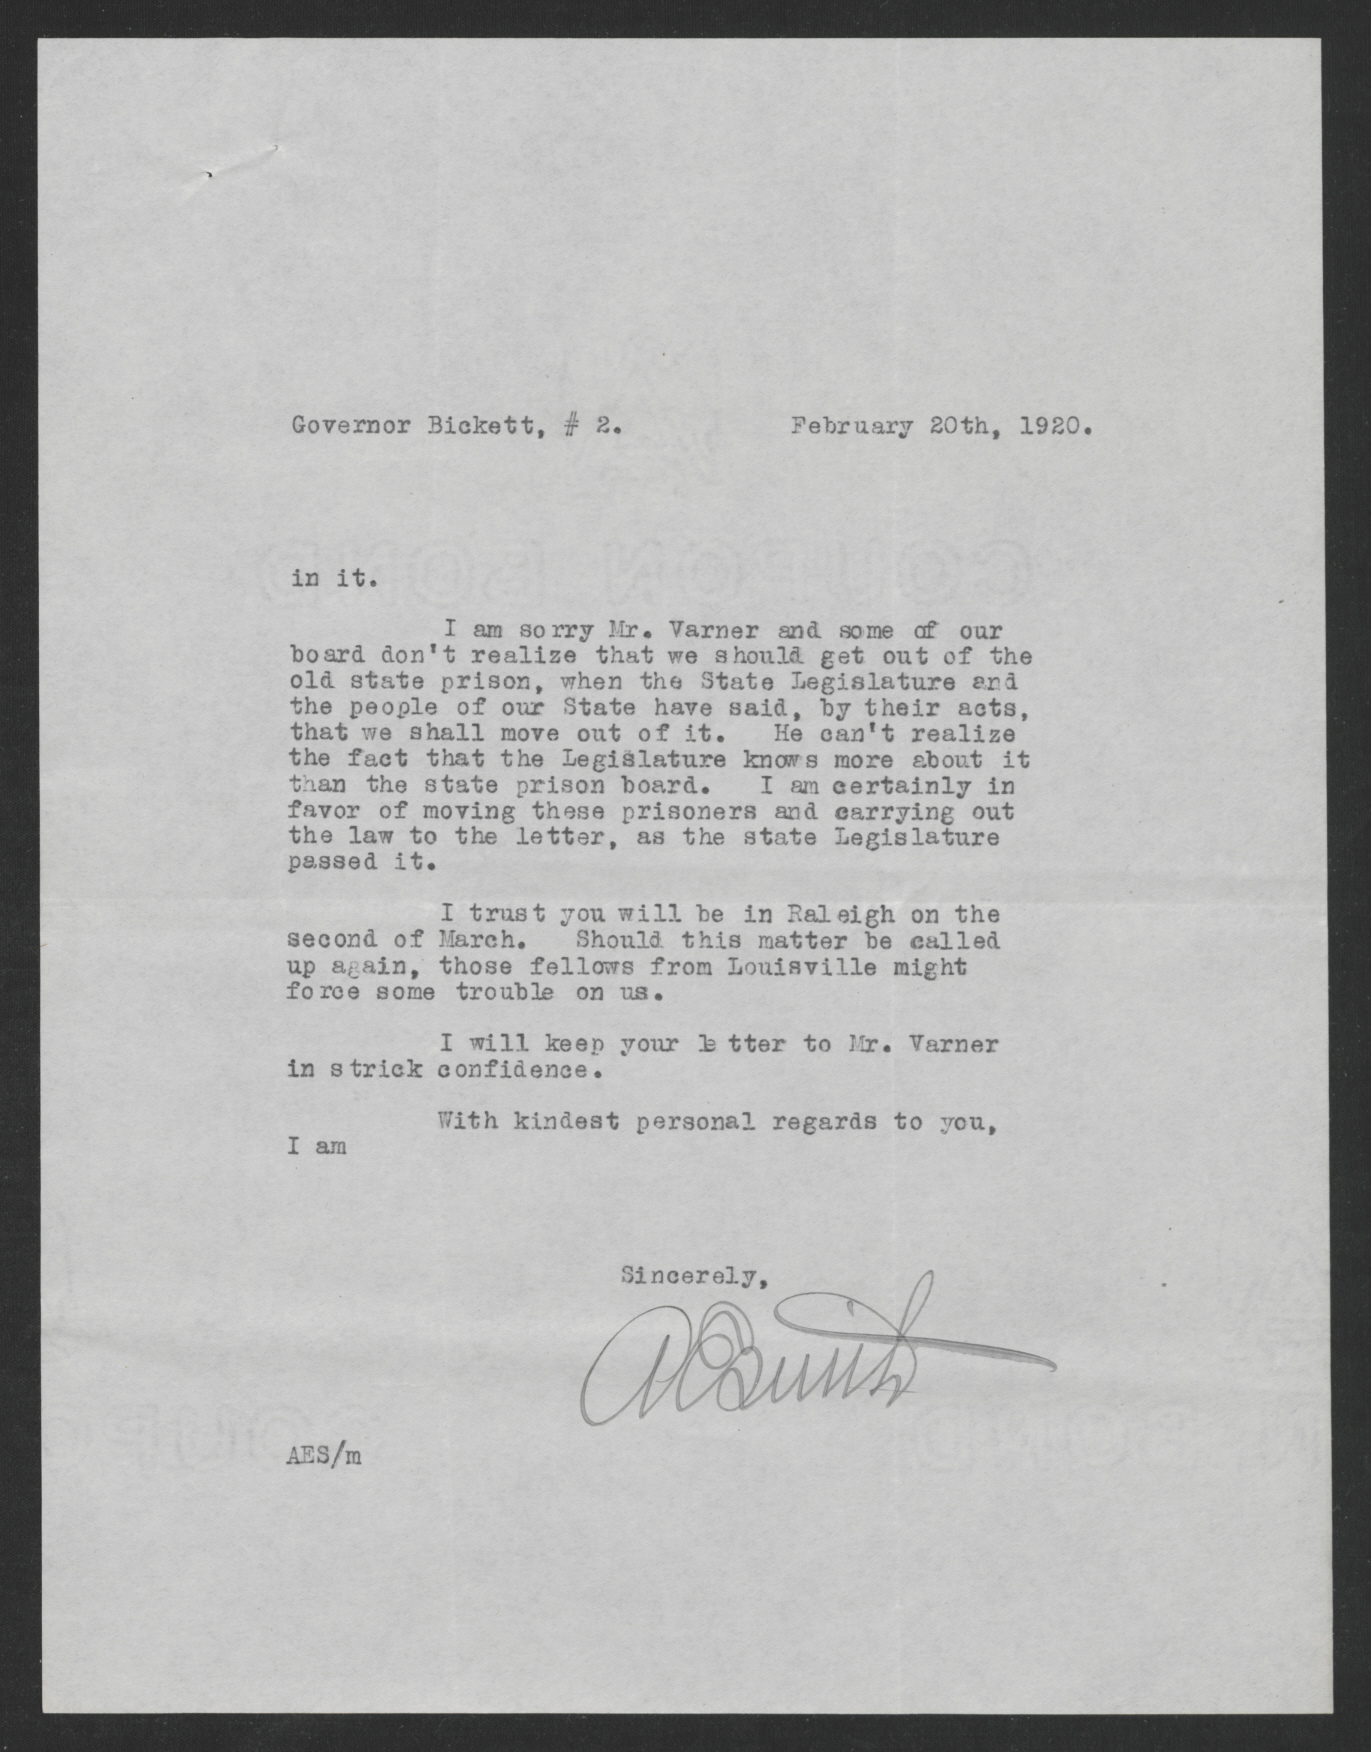 Smith to Bickett, February 20, 1920, page 2